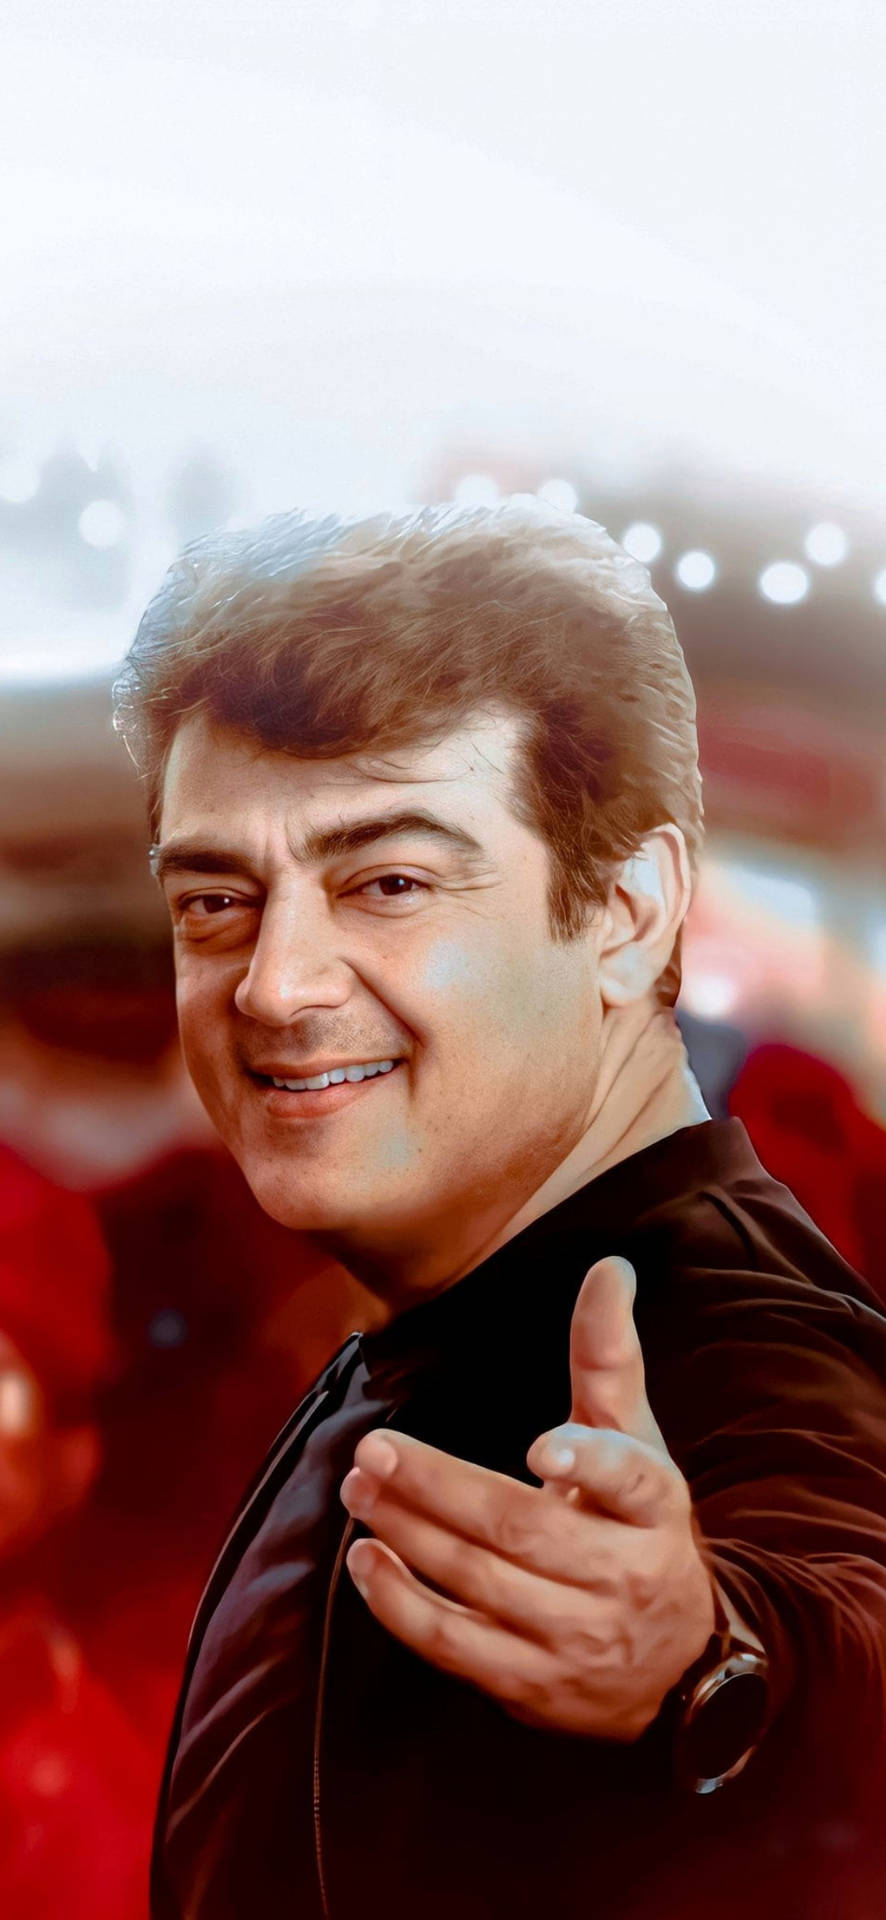 Thala Ajith's Intriguing Look From Valimai Film